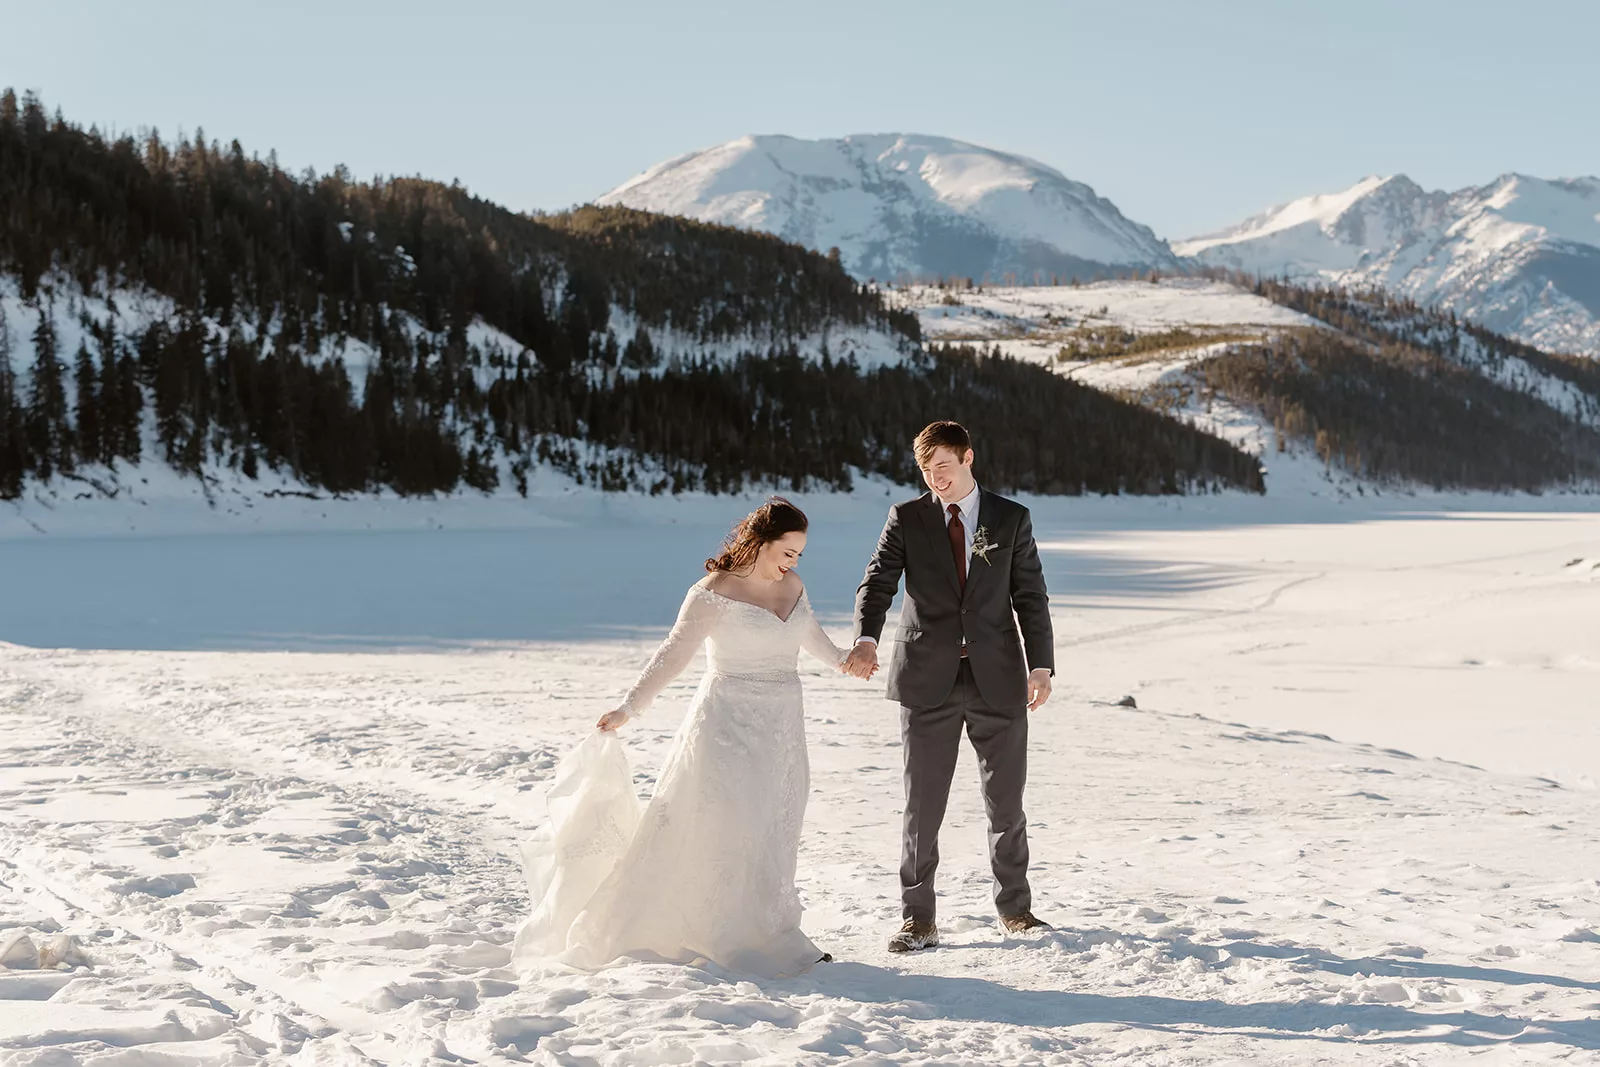 A couple walks along the snowy landscape during their winter breckenridge elopement.